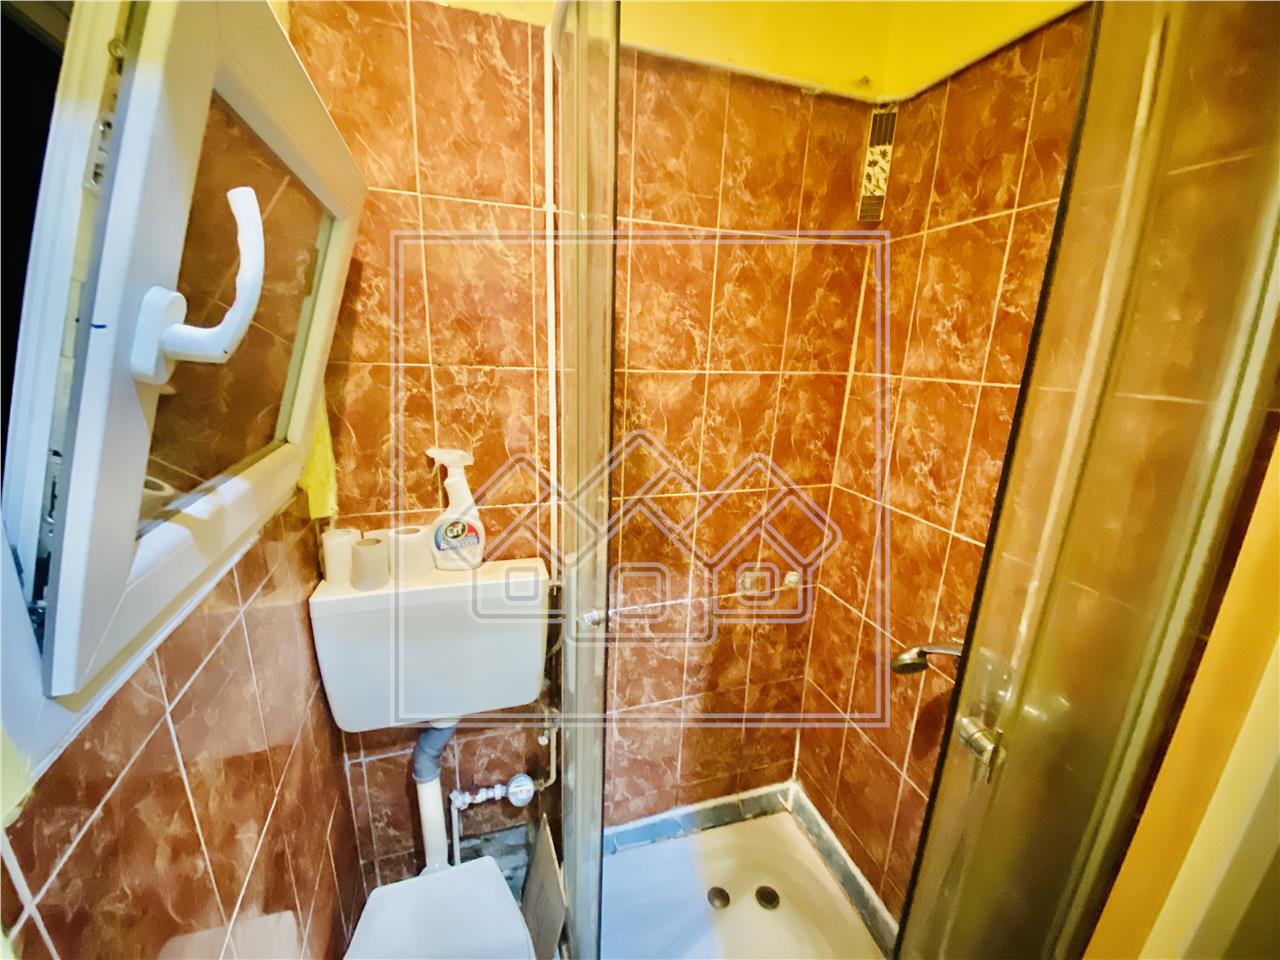 Studio for sale in Sibiu - suitable investment - Central Area